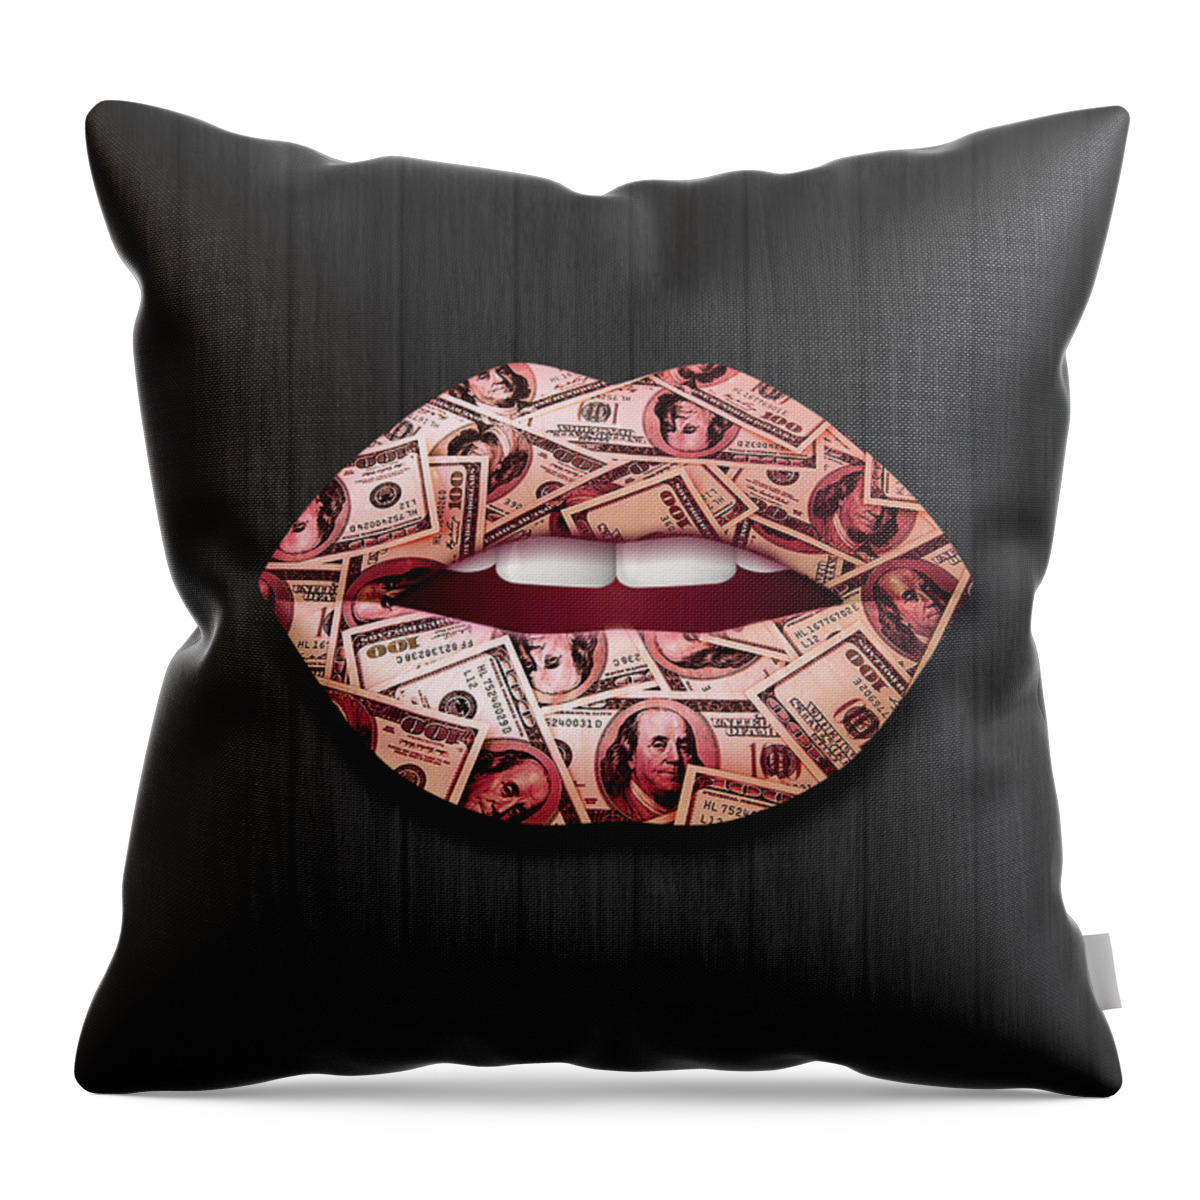  Throw Pillow featuring the digital art The Art of Persuasion by Hustlinc